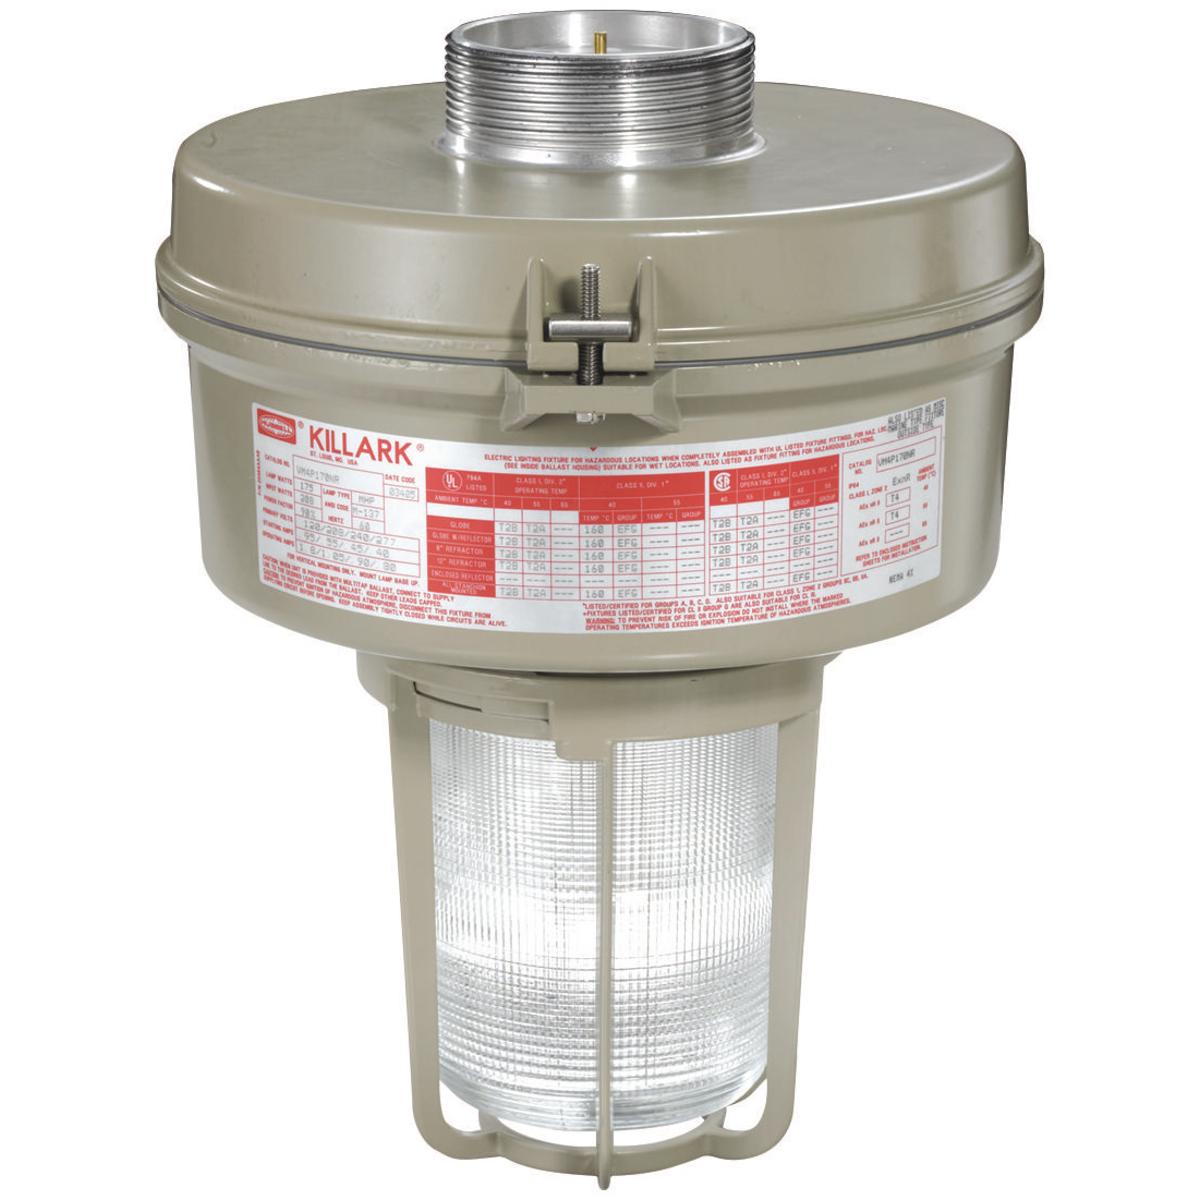 Hubbell VM3H100EZGLG VM3 Series - 100W Metal Halide Quadri-Volt - EZ Mount Adapter -  Globe and Guard  ; Ballast tank and splice box – corrosion resistant copper-free aluminum alloy with baked powder epoxy/polyester finish, electrostatically applied for complete, uniform corr